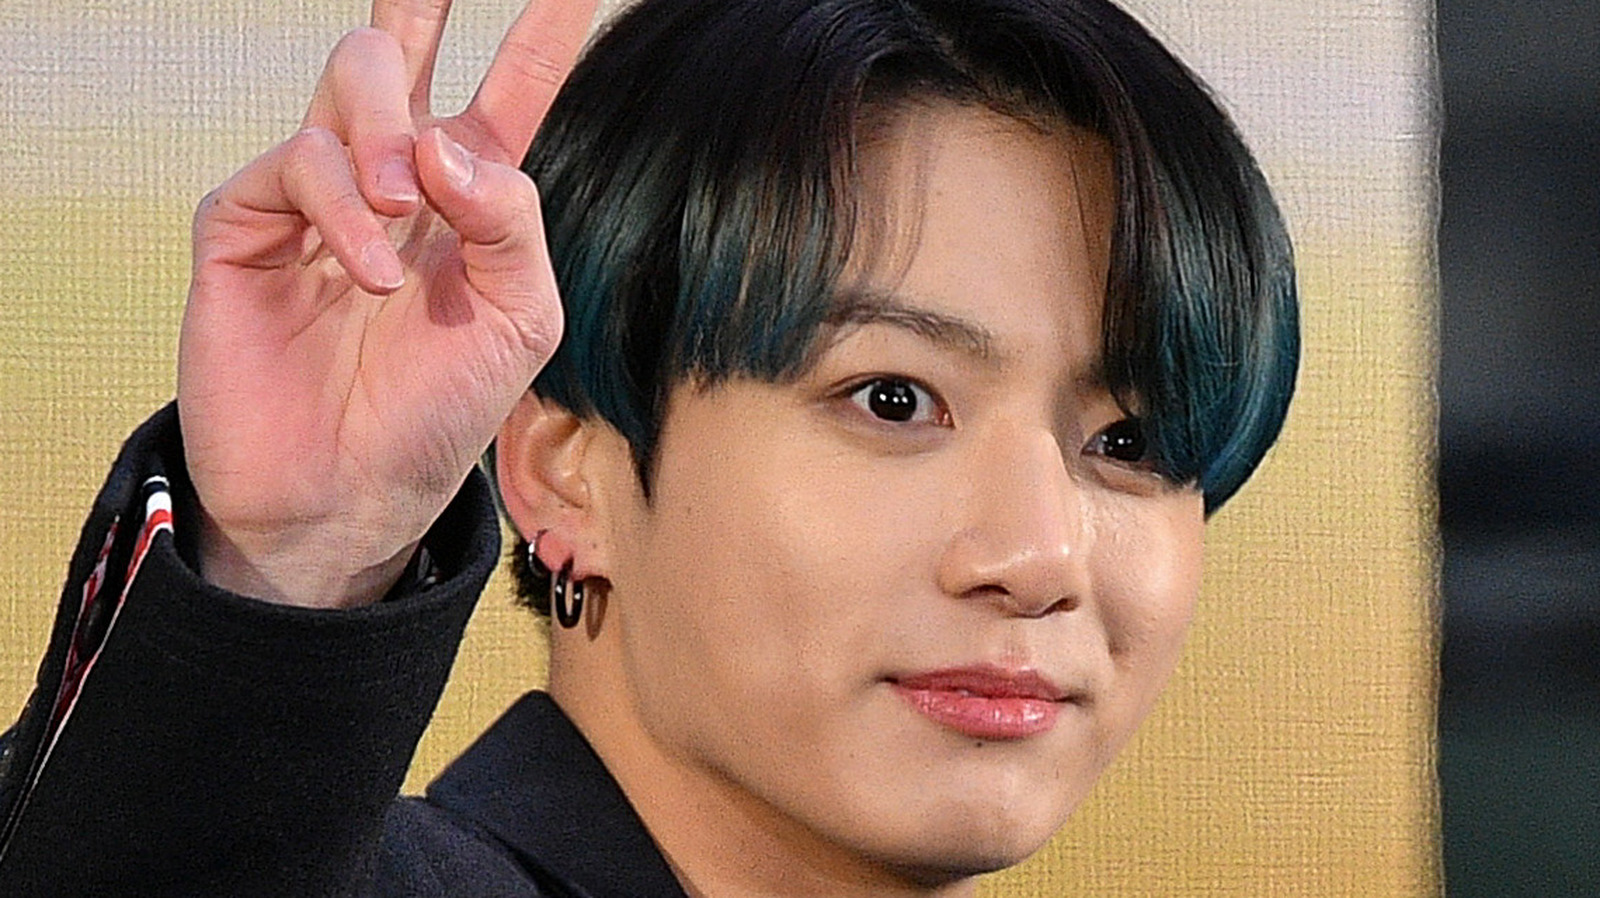 BTS' Jungkook's Surprising New Hair Color Has Fans Doing A Double Take